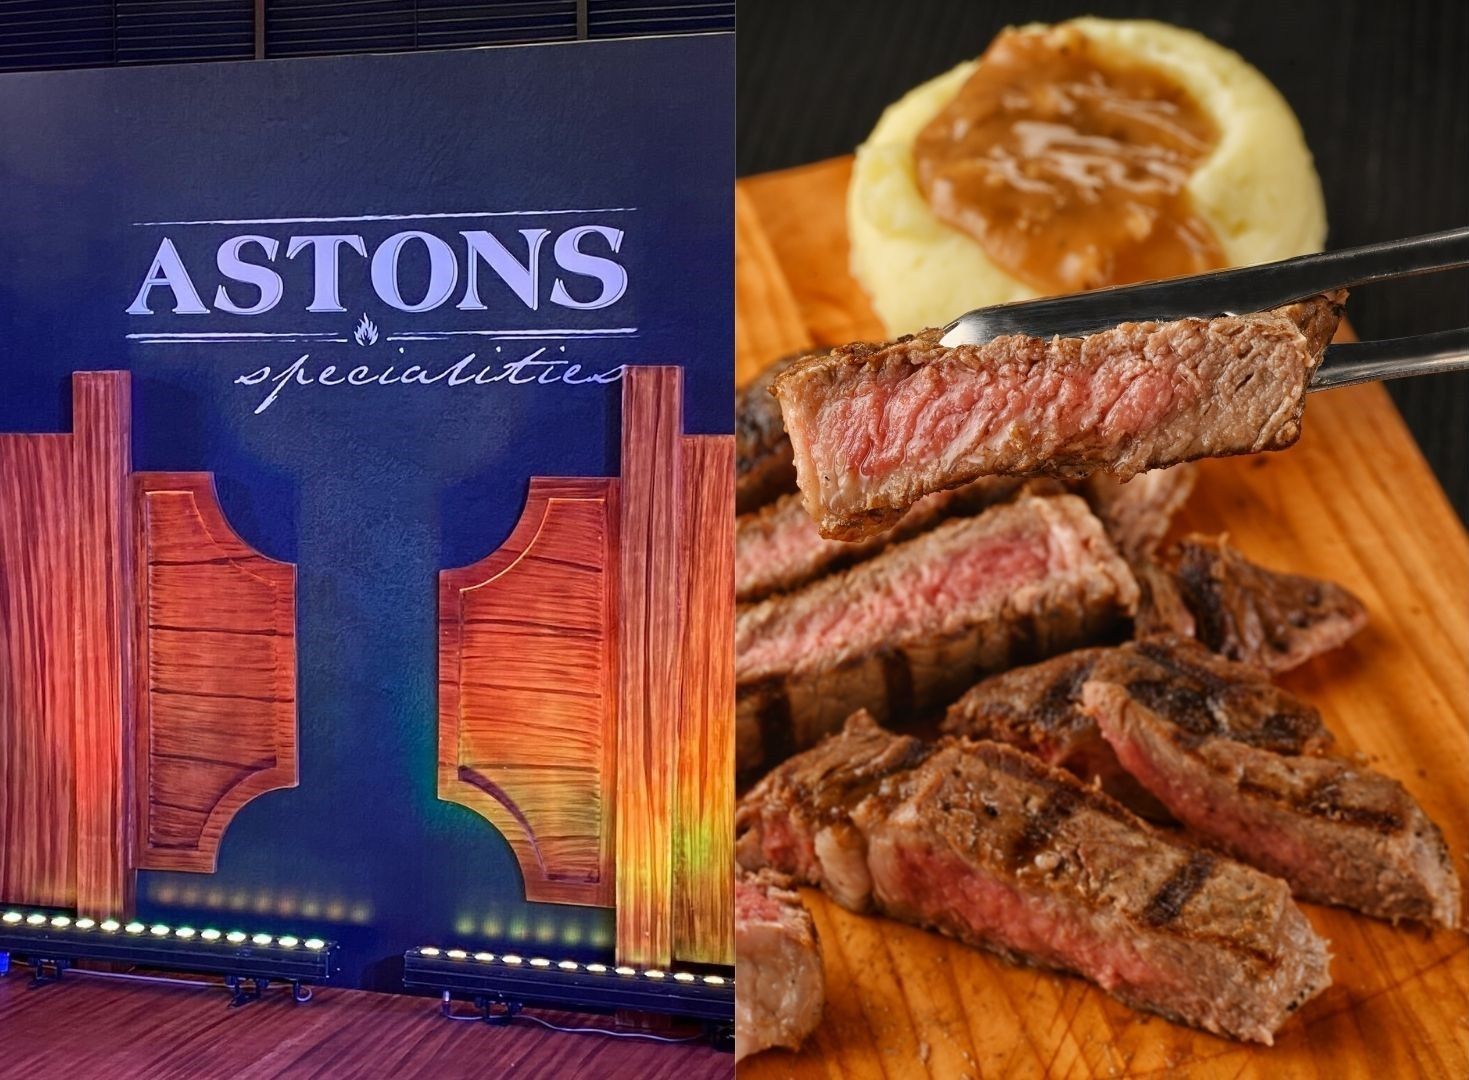 Singapore's ASTONS Specialities comes to the Philippines